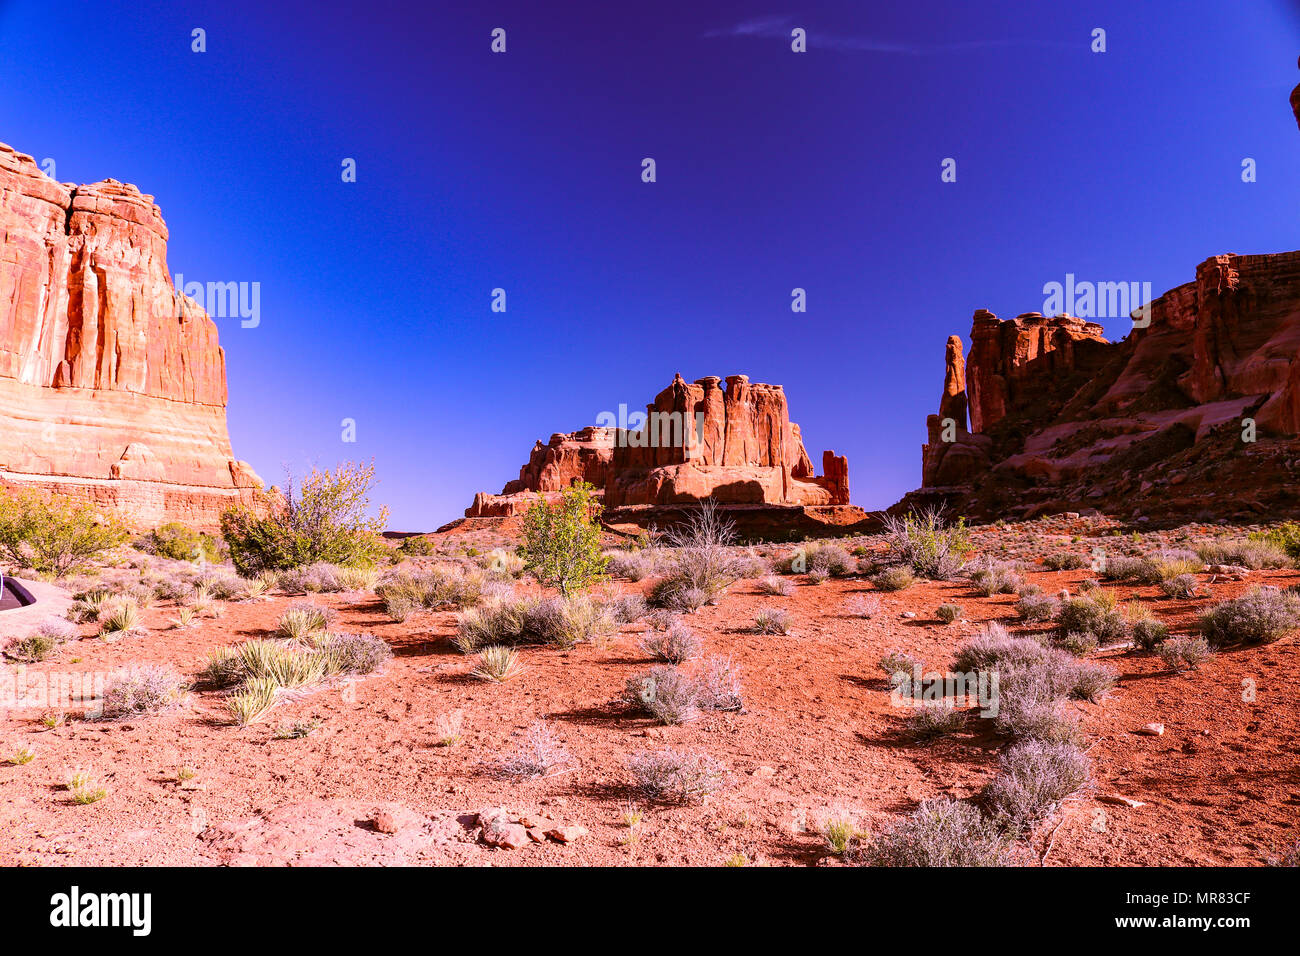 The red desert sand leads the way to a towering sandstone formation with a brilliant blue sky back drop. Stock Photo